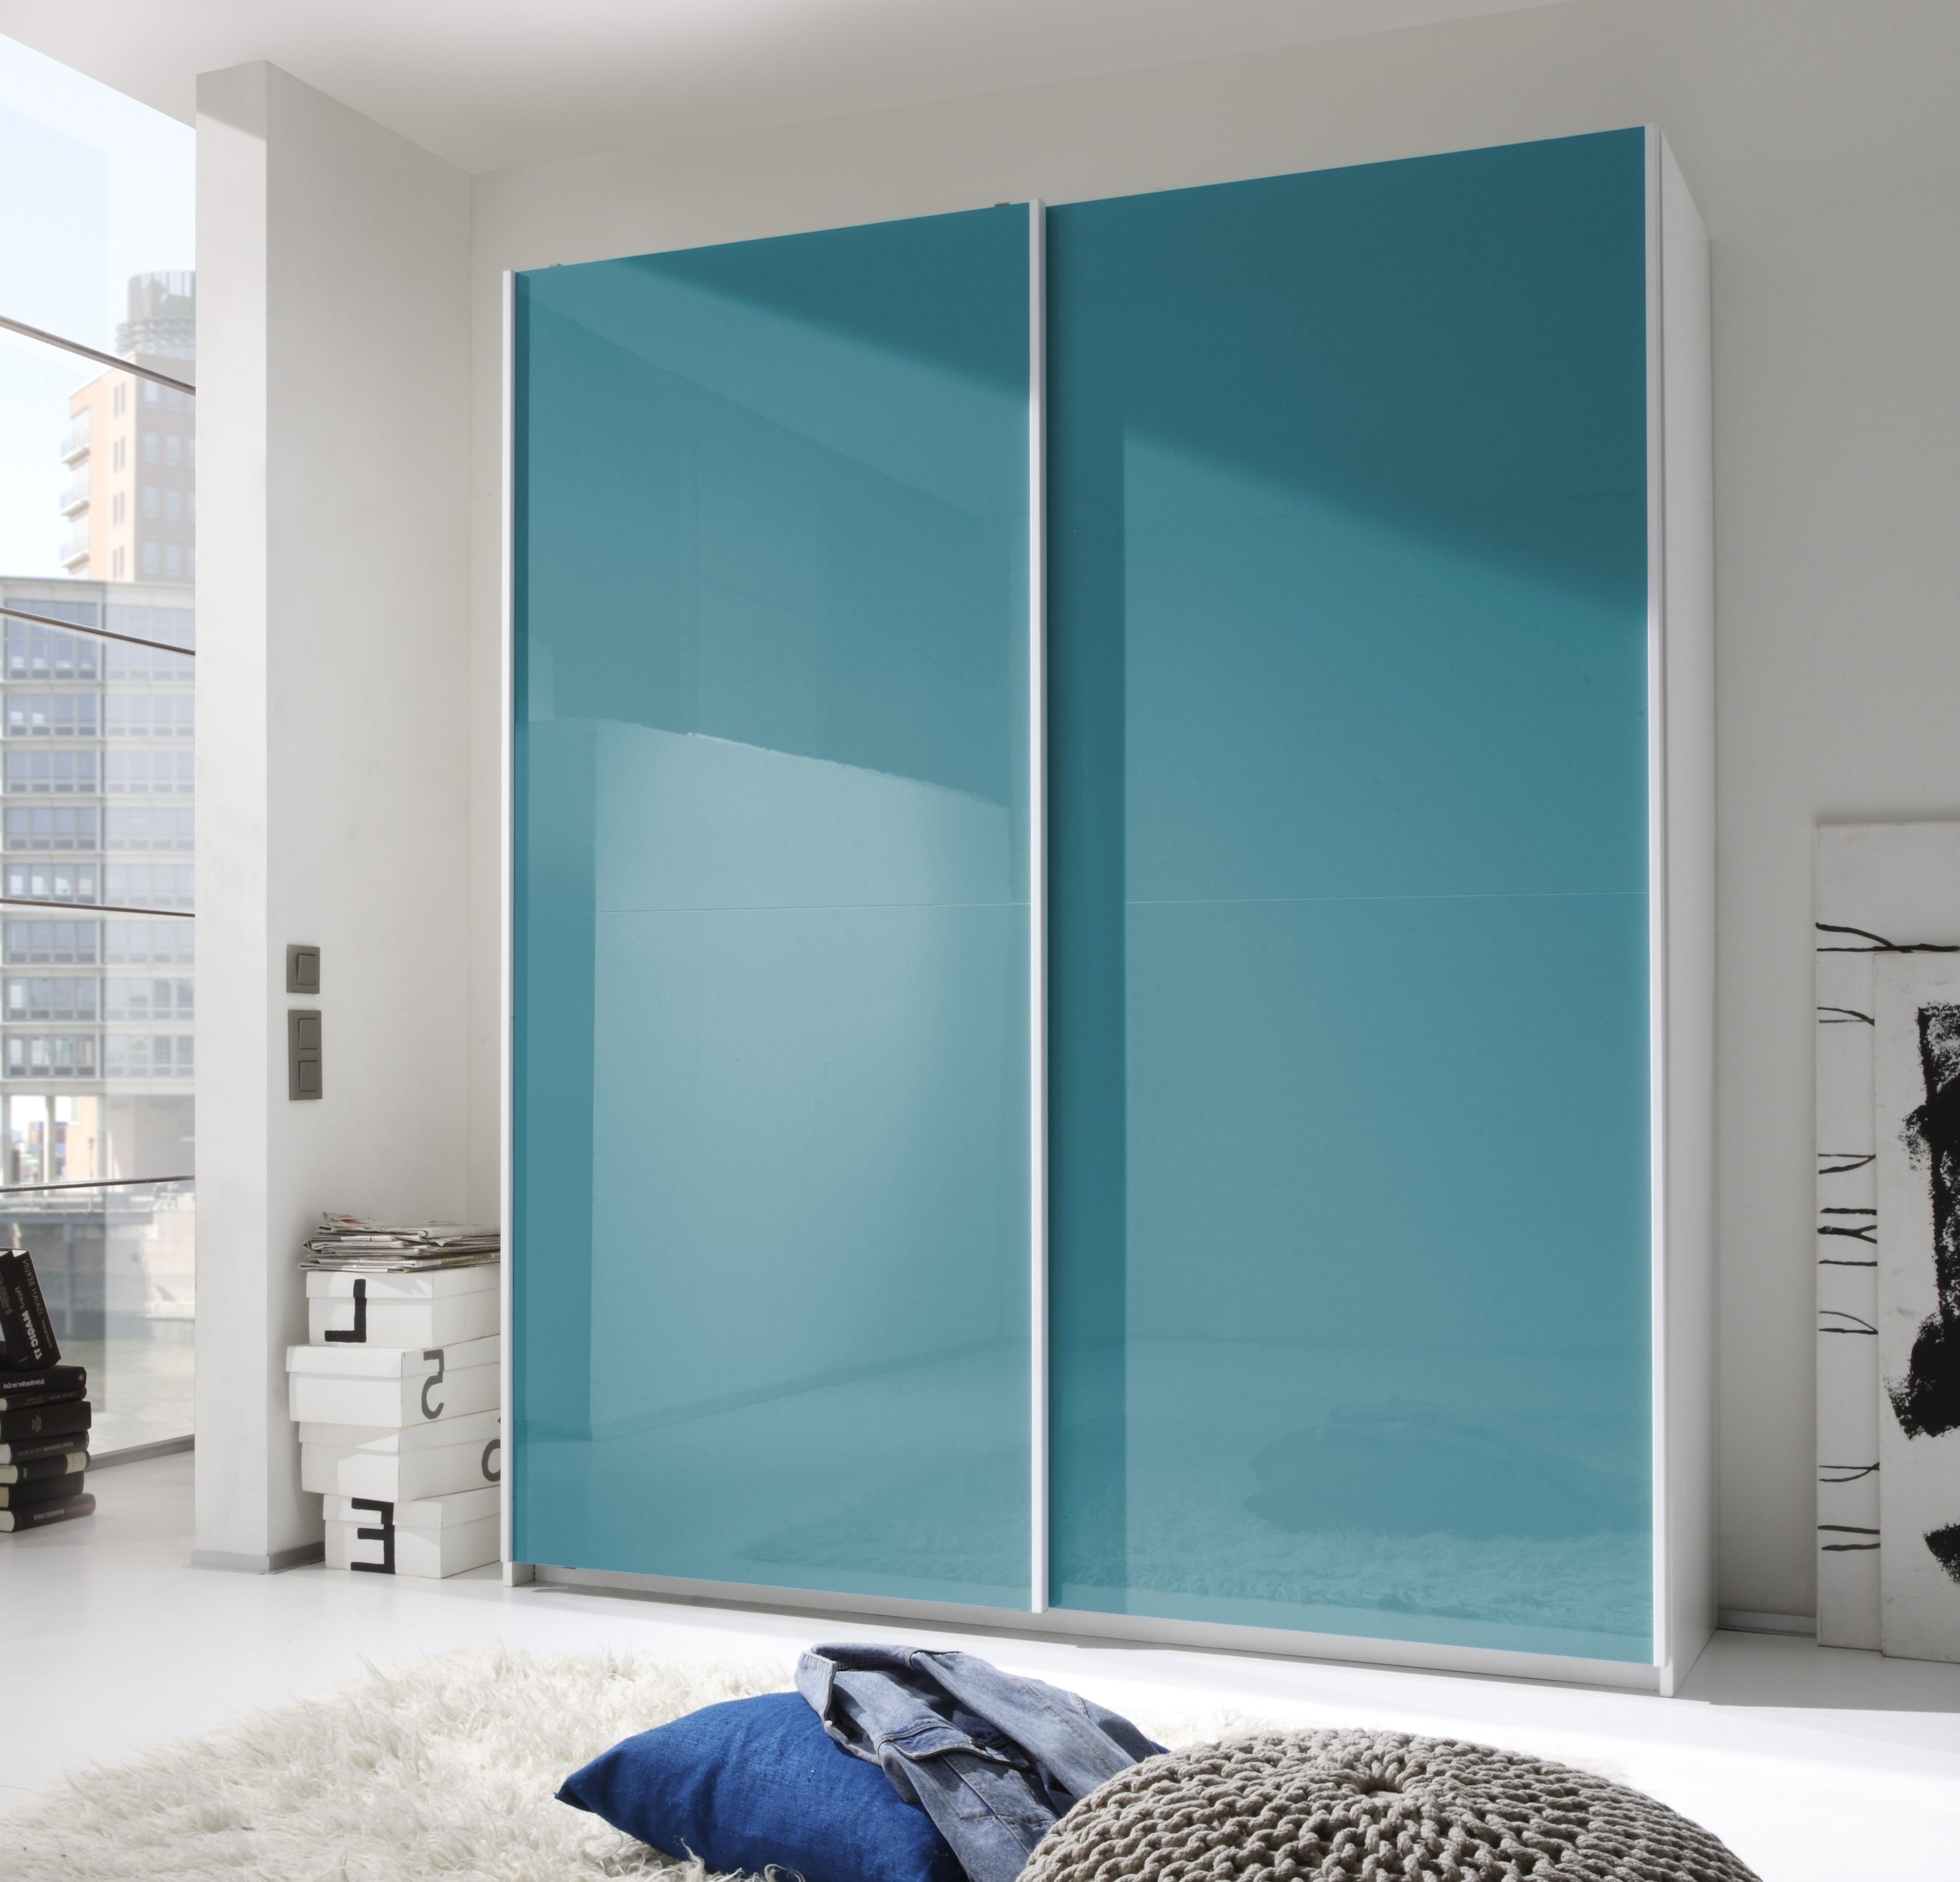 Well Liked Smart Wardrobe W/2 Sliding Doors, Turquoise Buy Online At Best Throughout 2 Sliding Door Wardrobes (View 3 of 15)